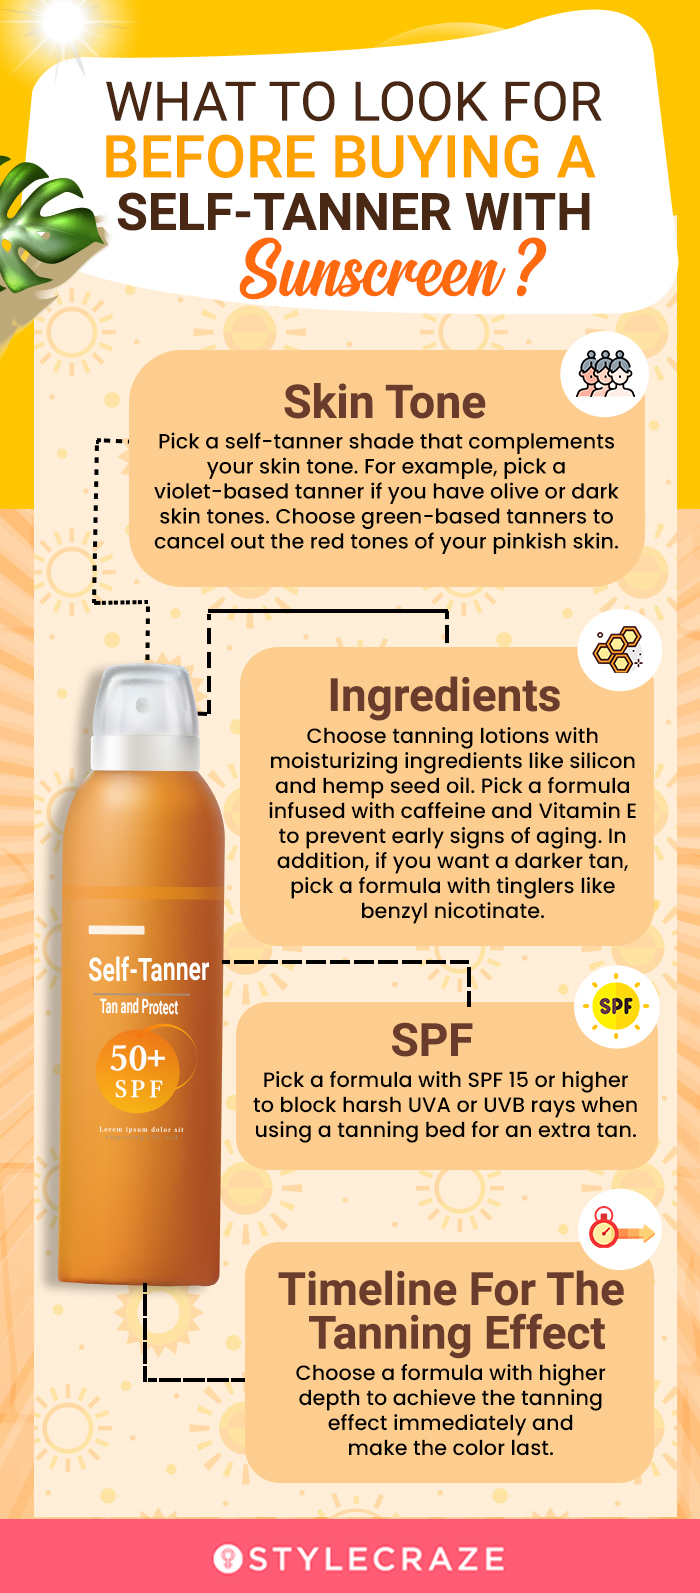 What To Look For Before Buying A Self-Tanner With Sunscreen?  [infographic]